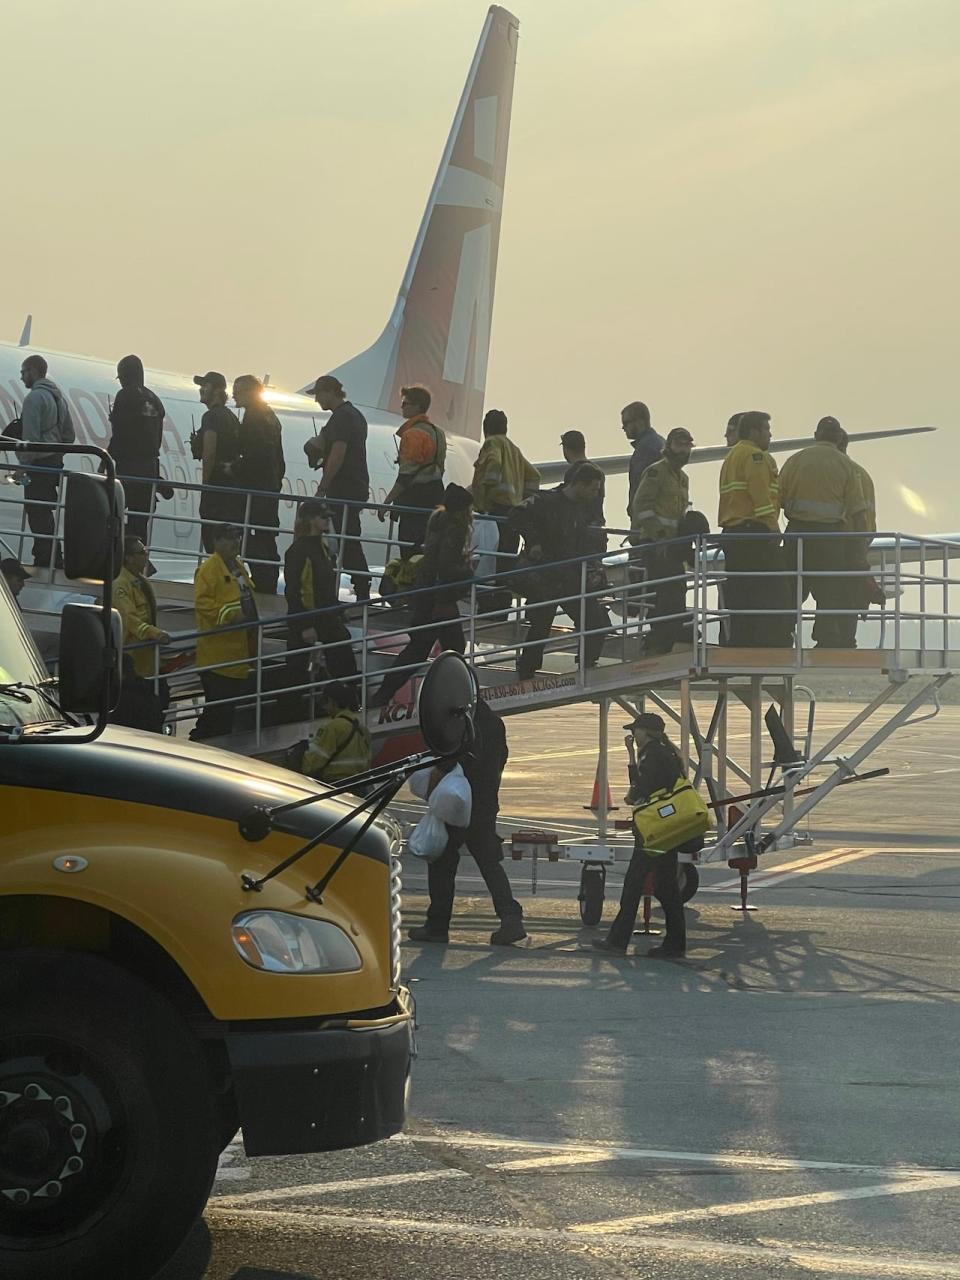 Firefighters board a plane in Yellowknife on Wednesday evening.  (Joanne Stassen/CBC - image credit)